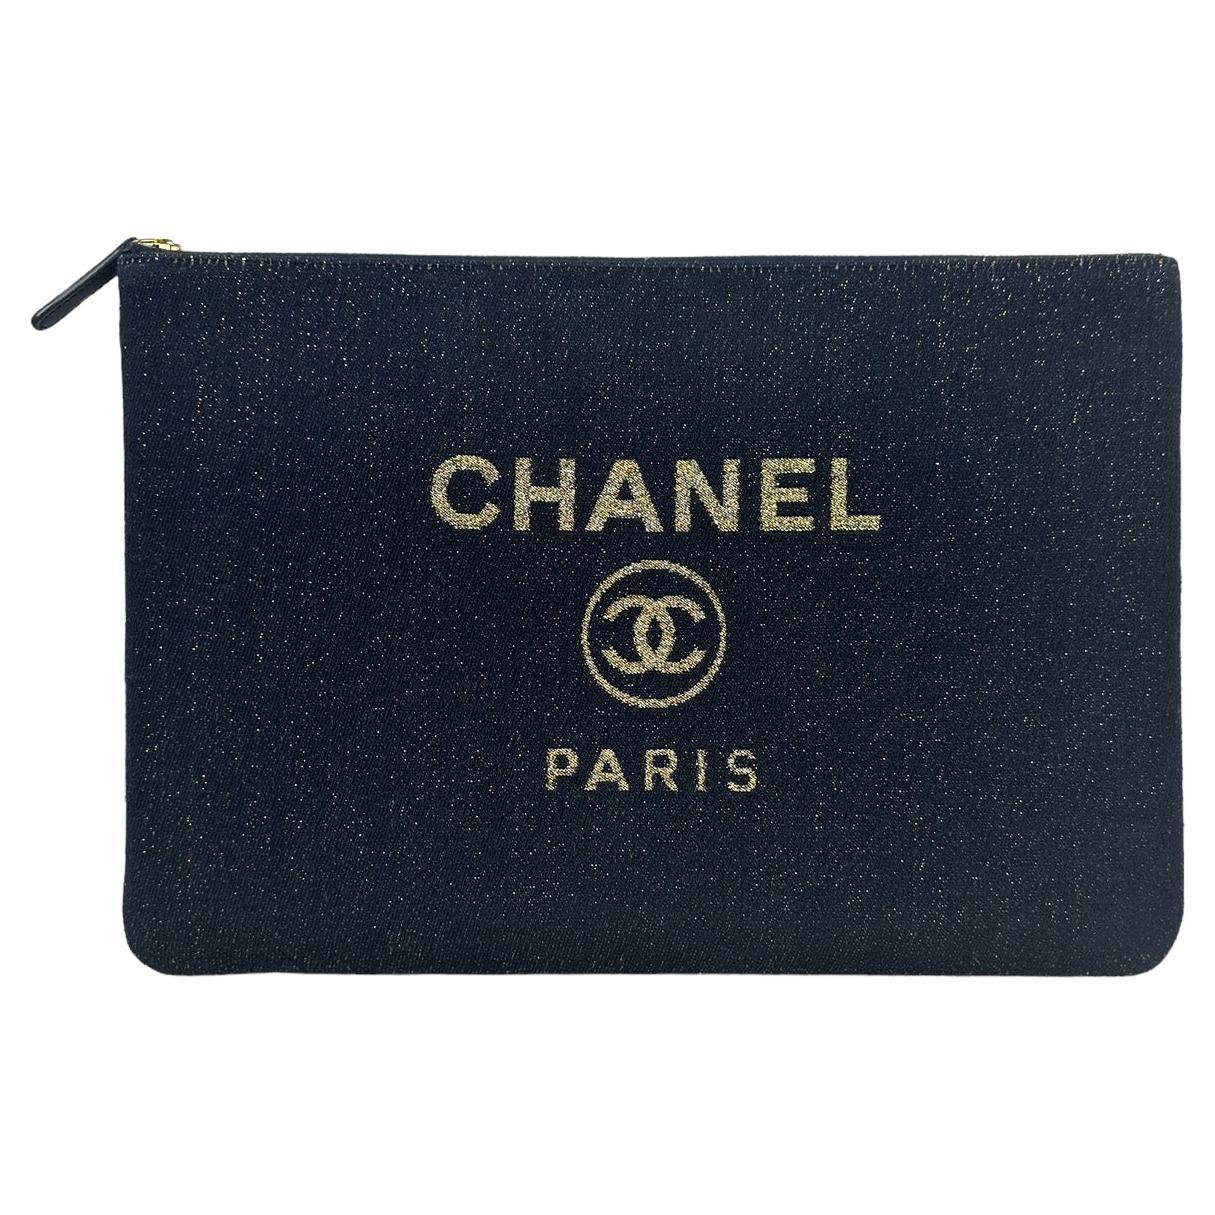 Chanel Navy/Gold Glitter Large Deauville Pouch Bag For Sale